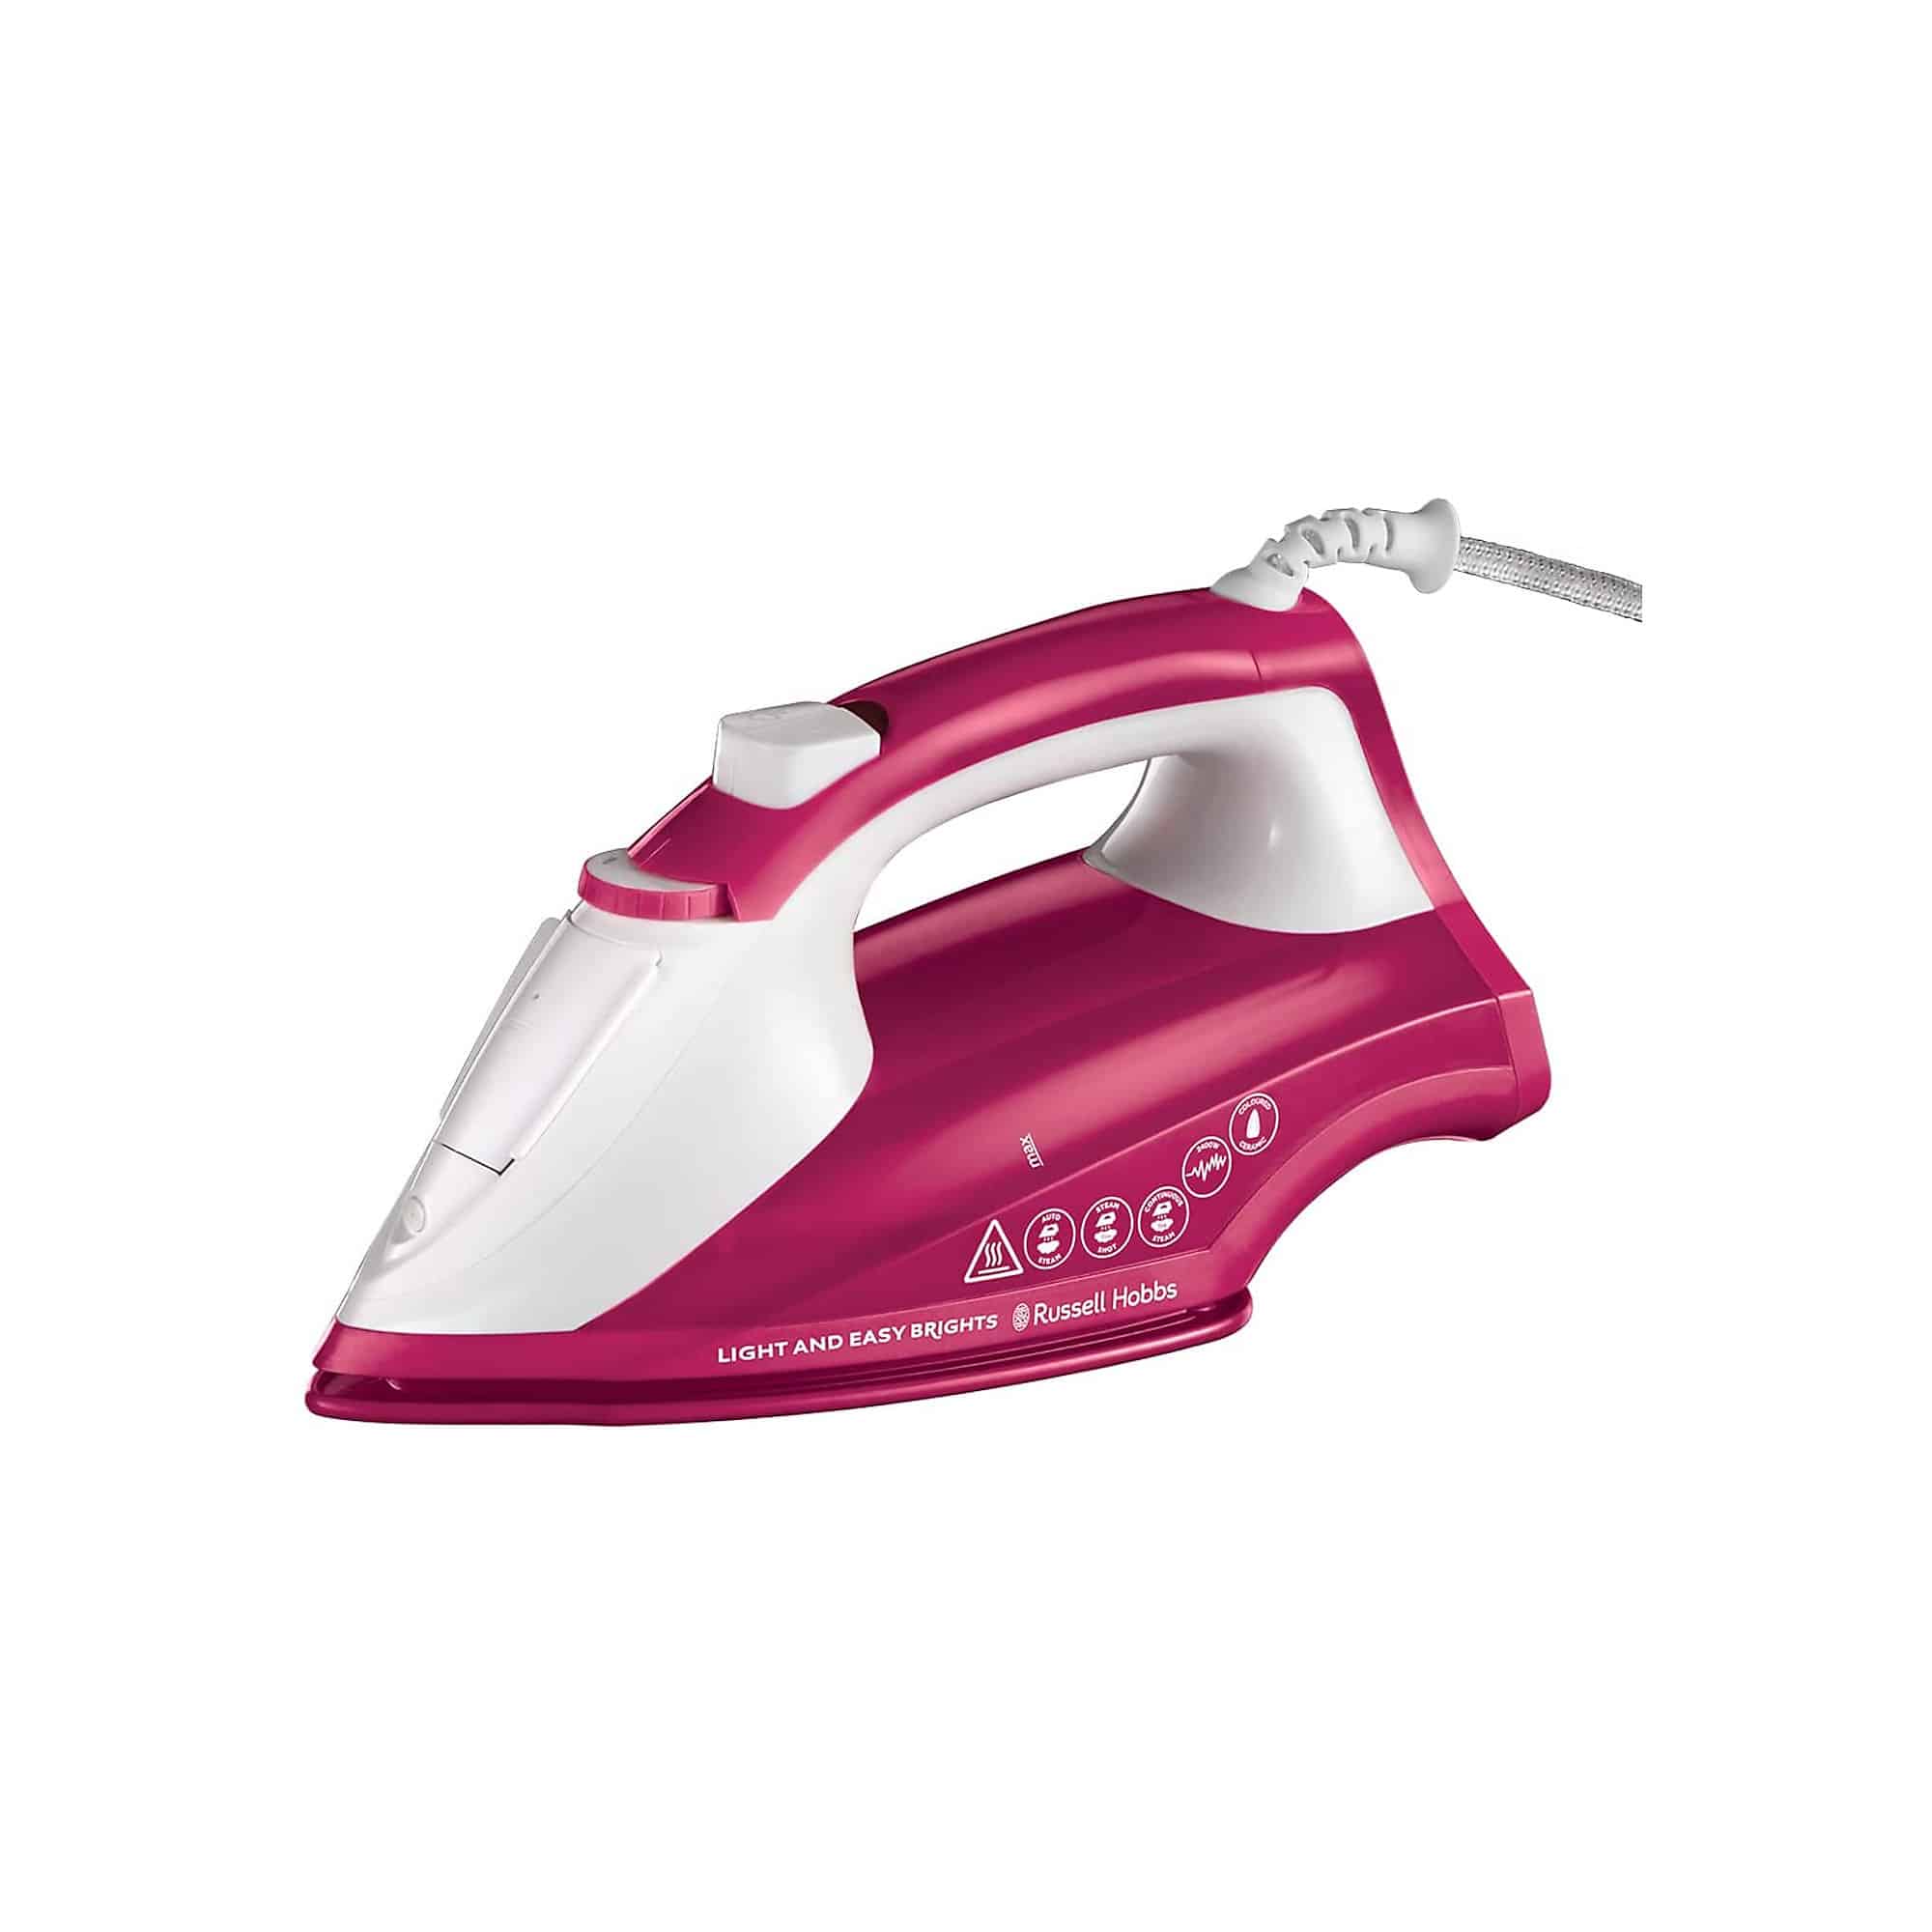 Russell Hobbs 26480 Light and Easy Brights Steam Iron 2400W, 0.24L Water Tank-0122